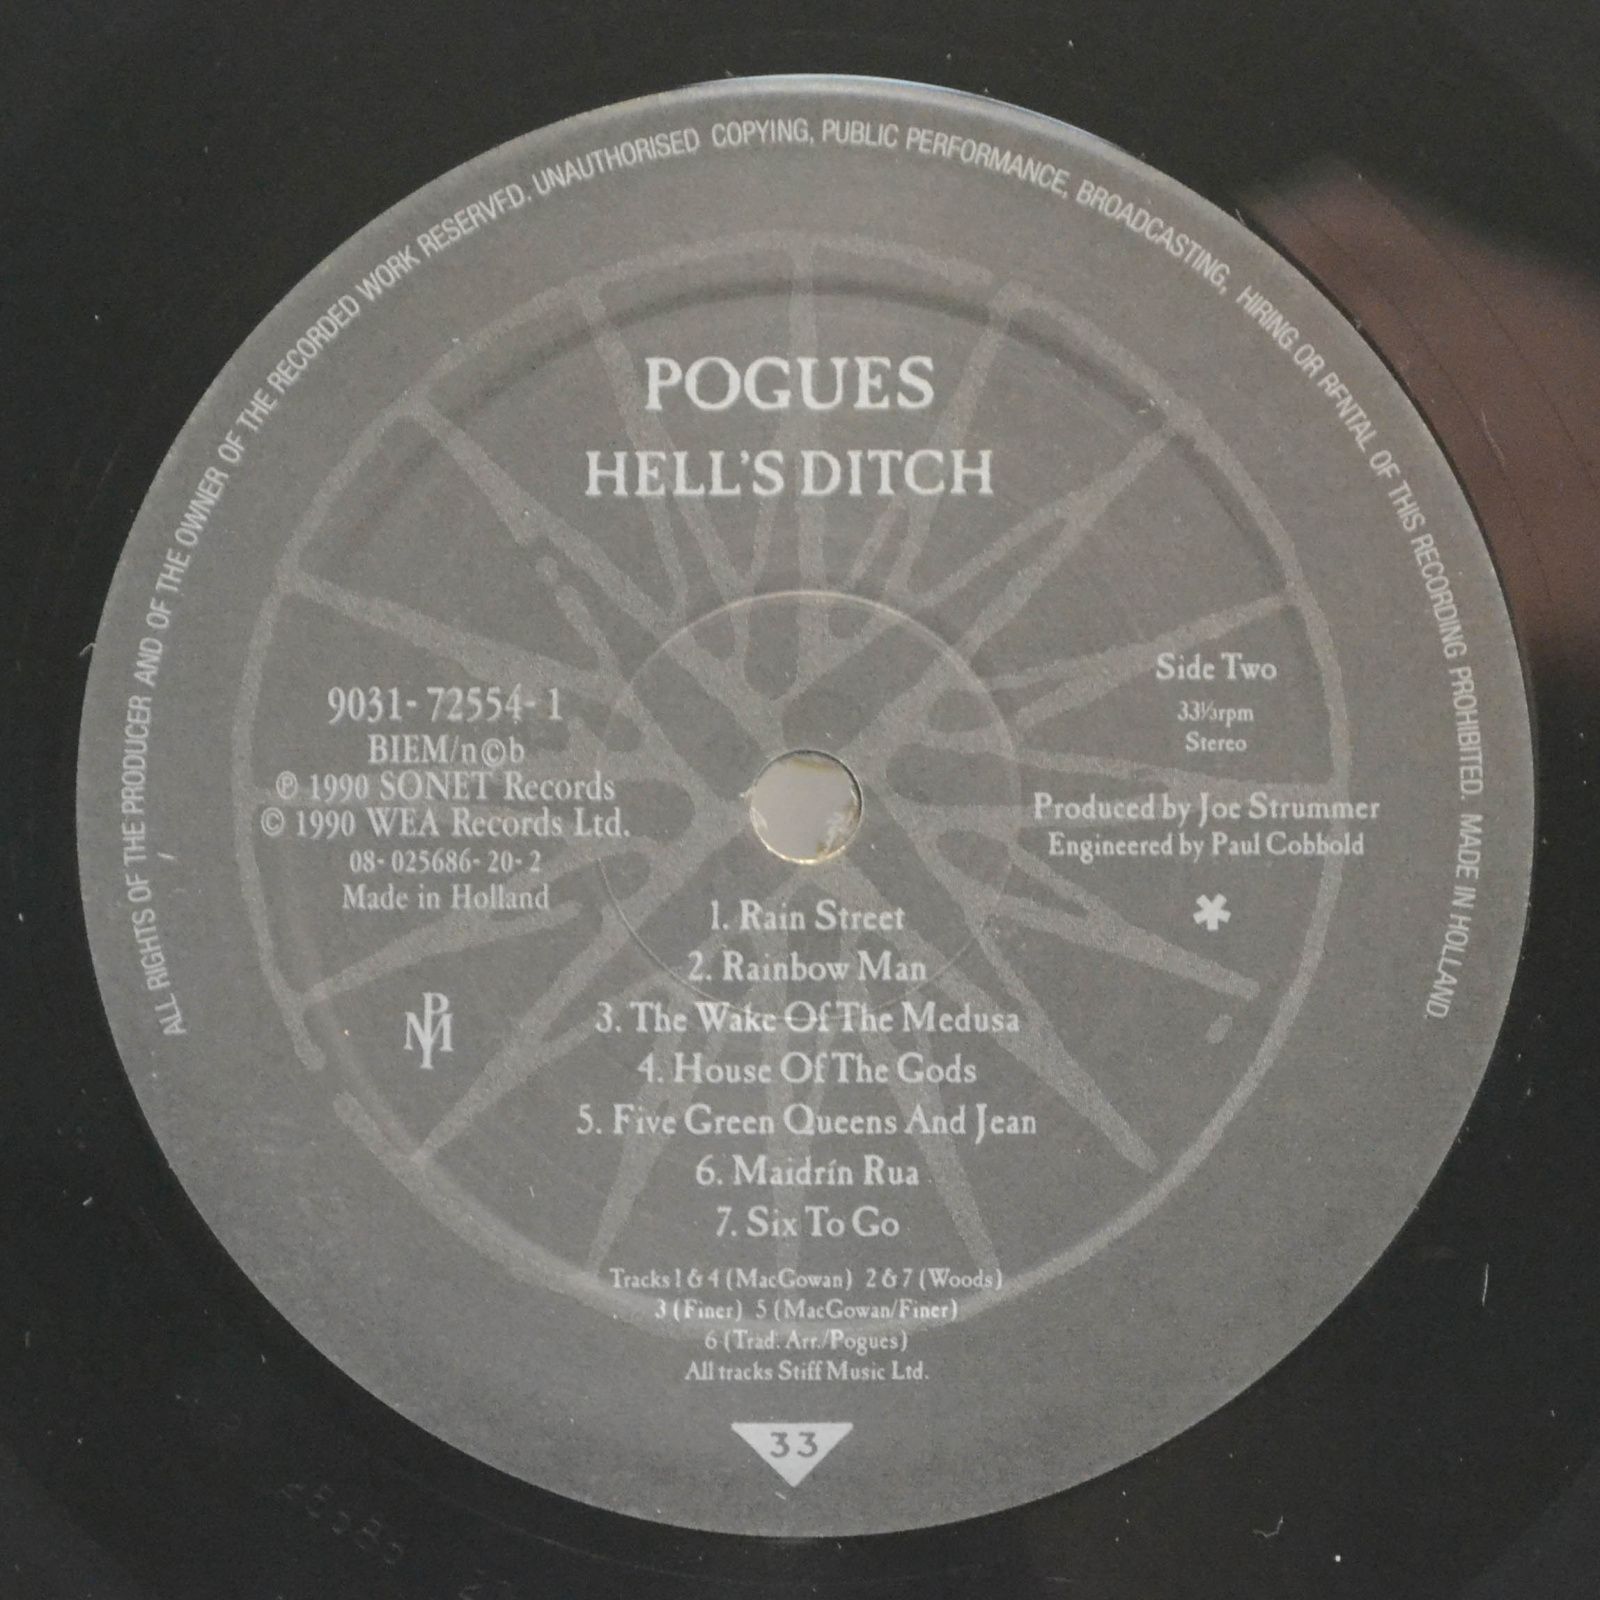 Pogues — Hell's Ditch, 1990